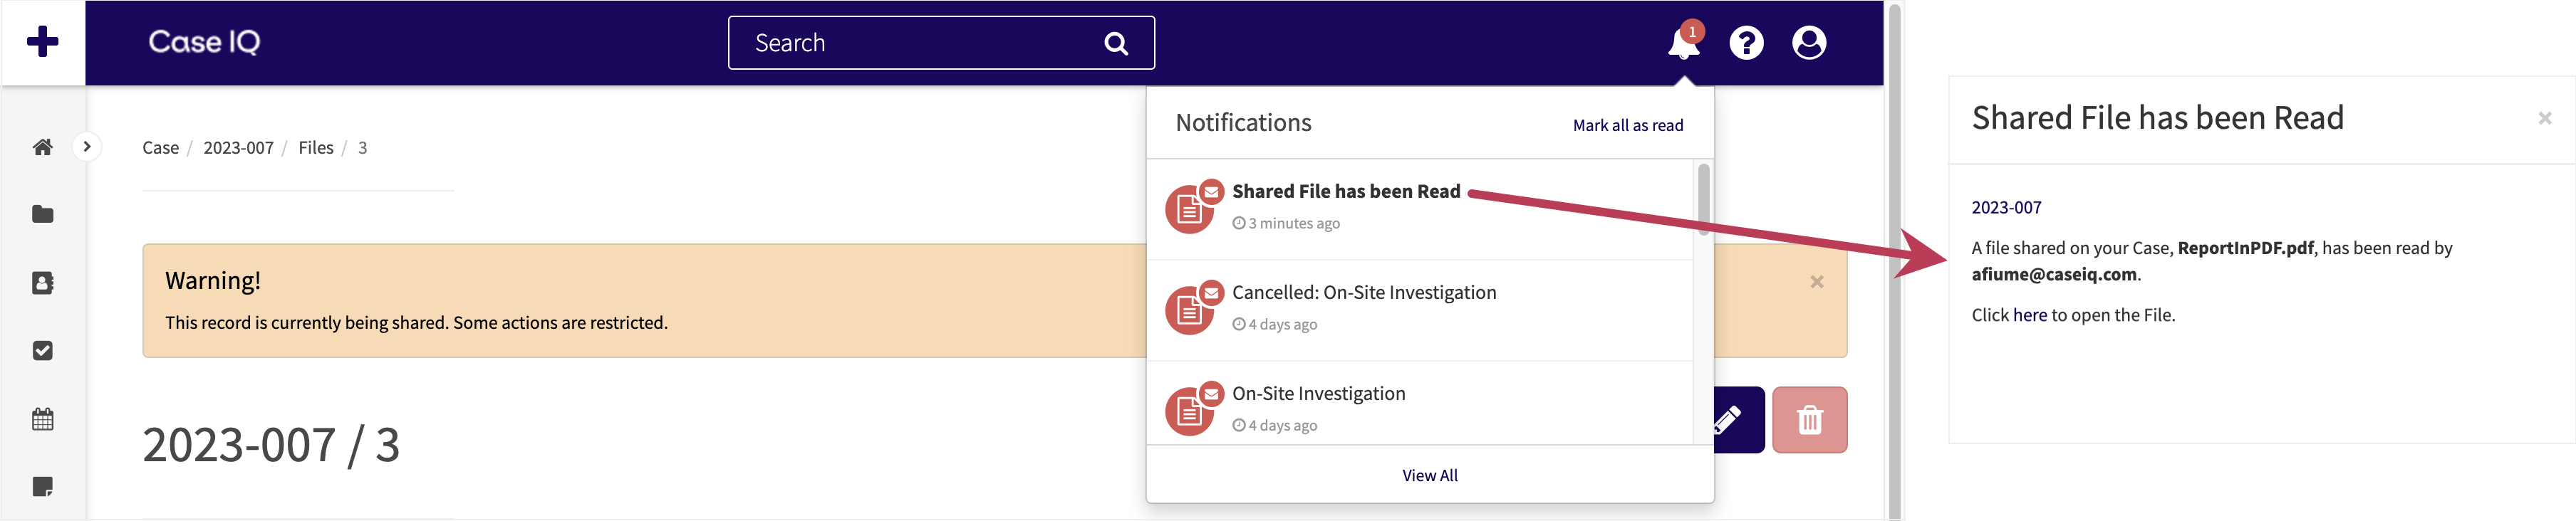 Shared File Notification in Notifications menu.